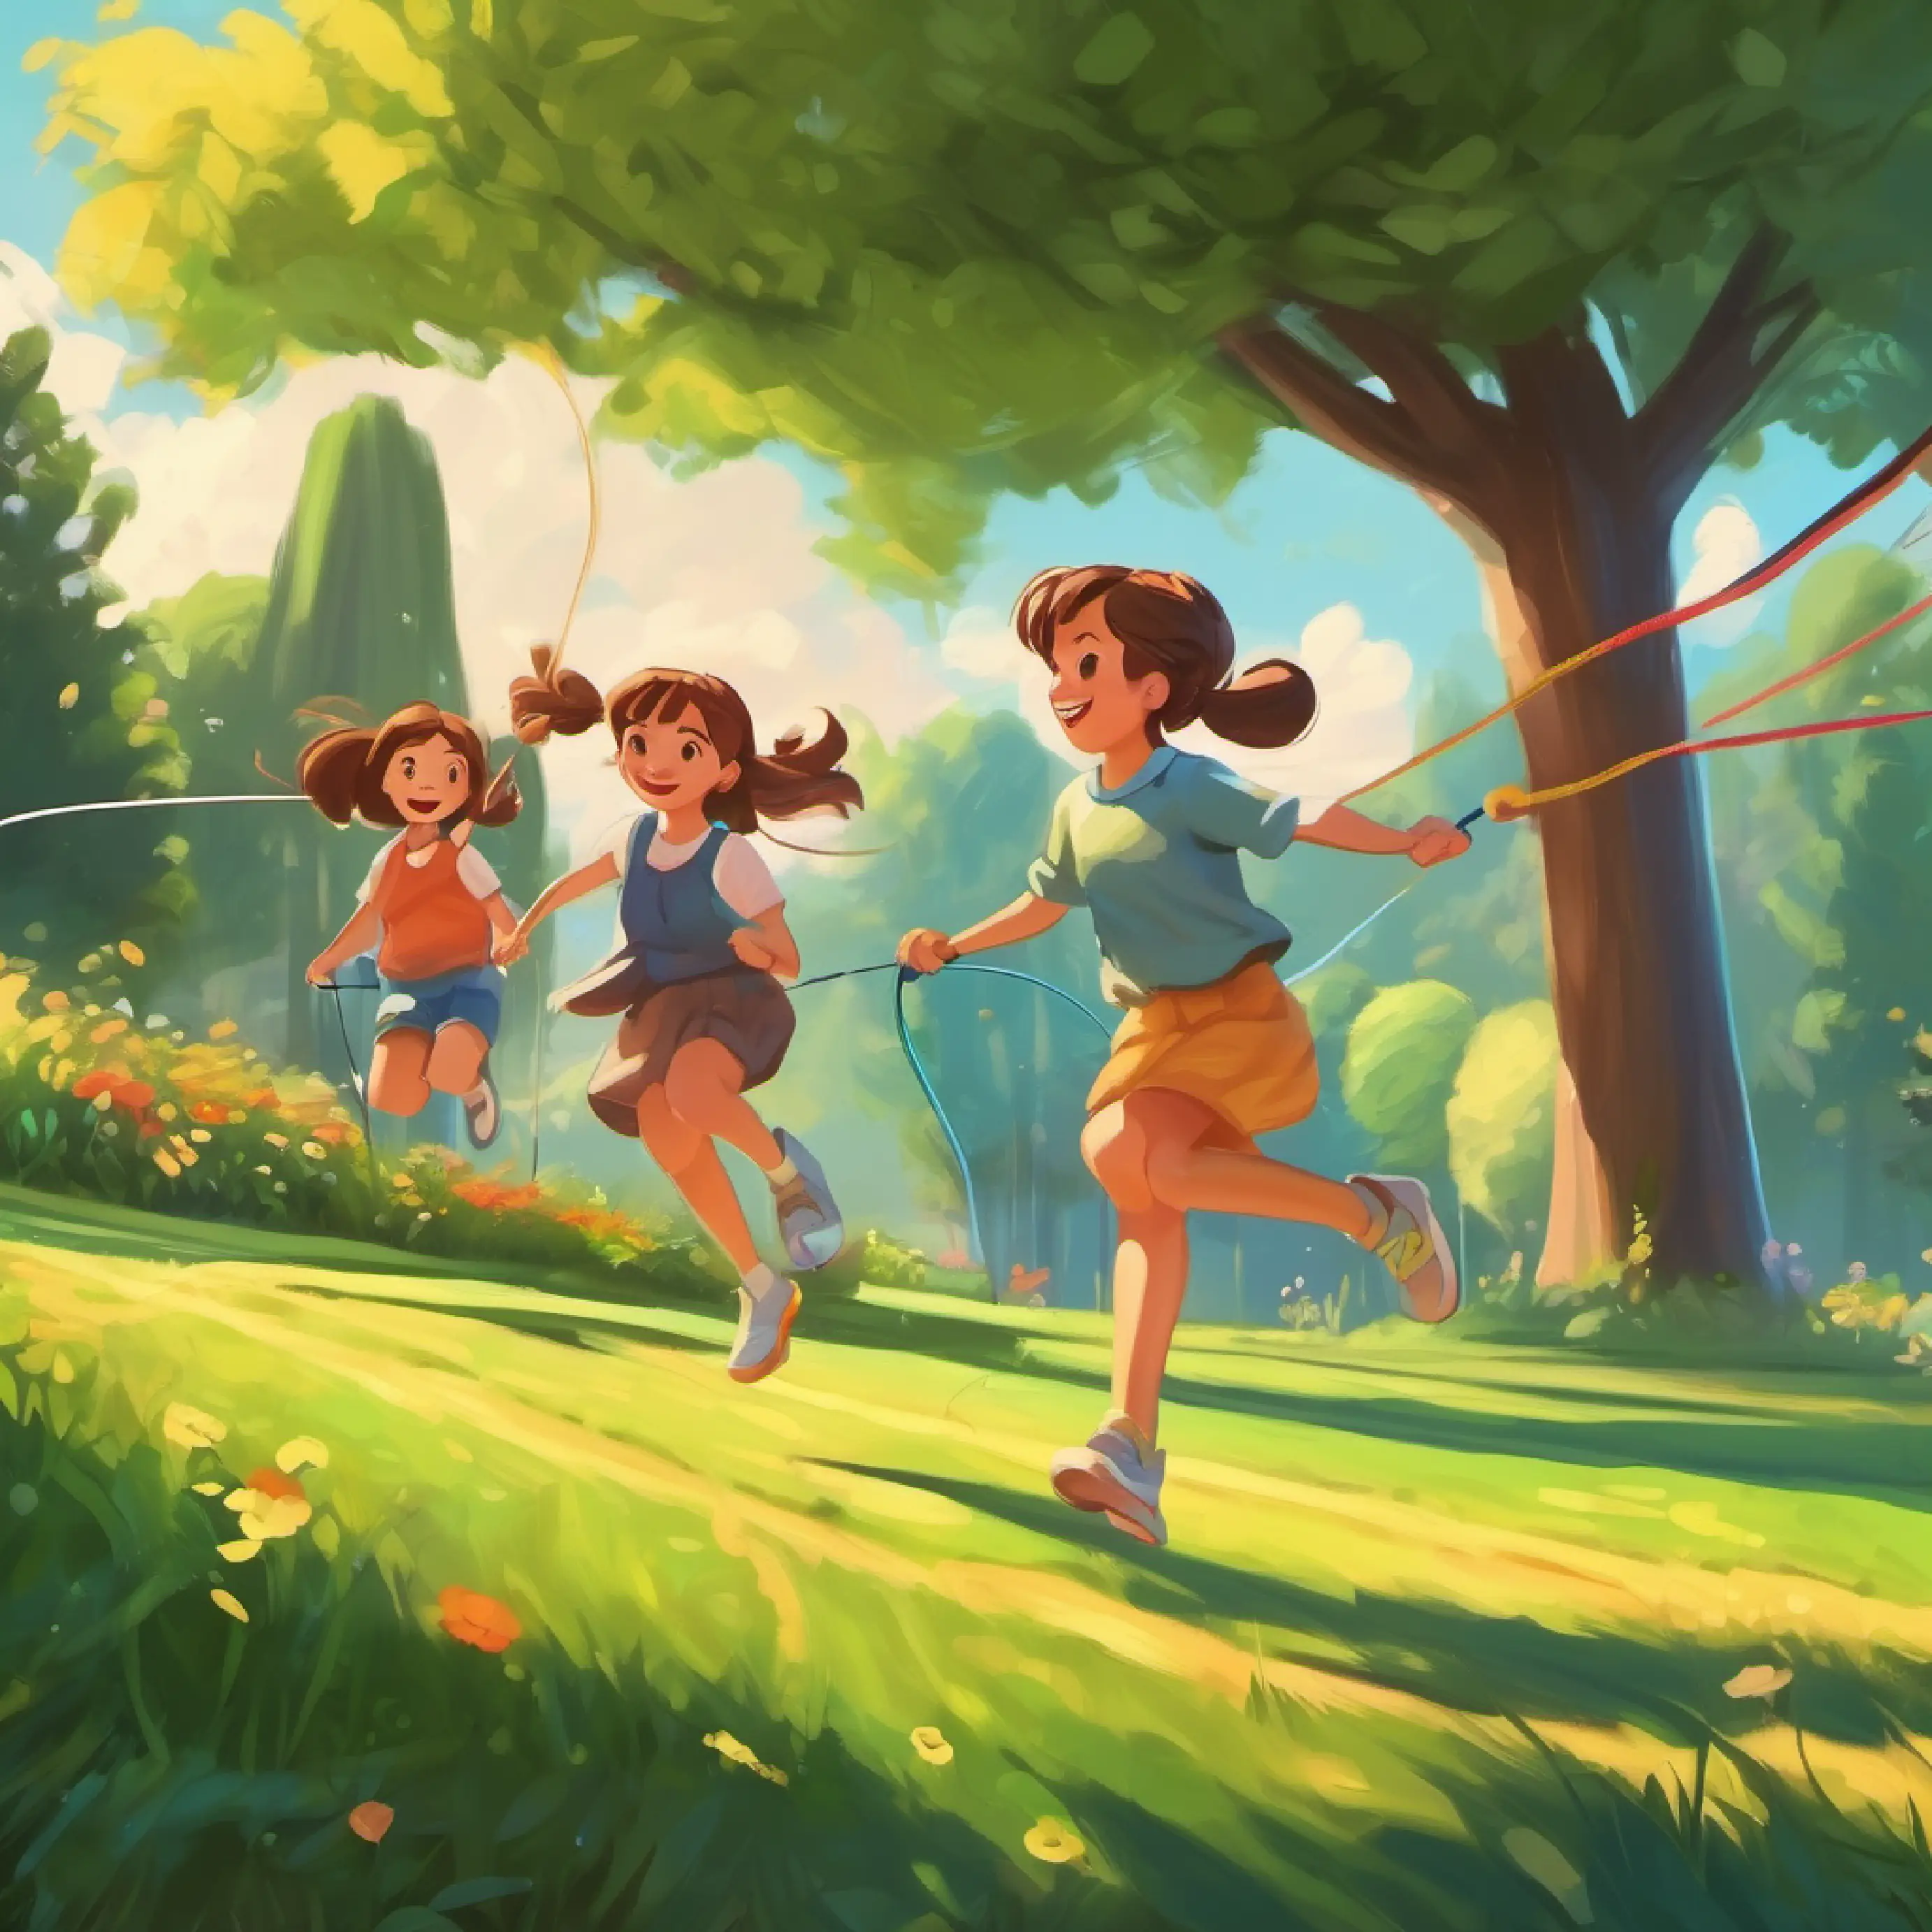 Jumping rope with friends on the lawn.